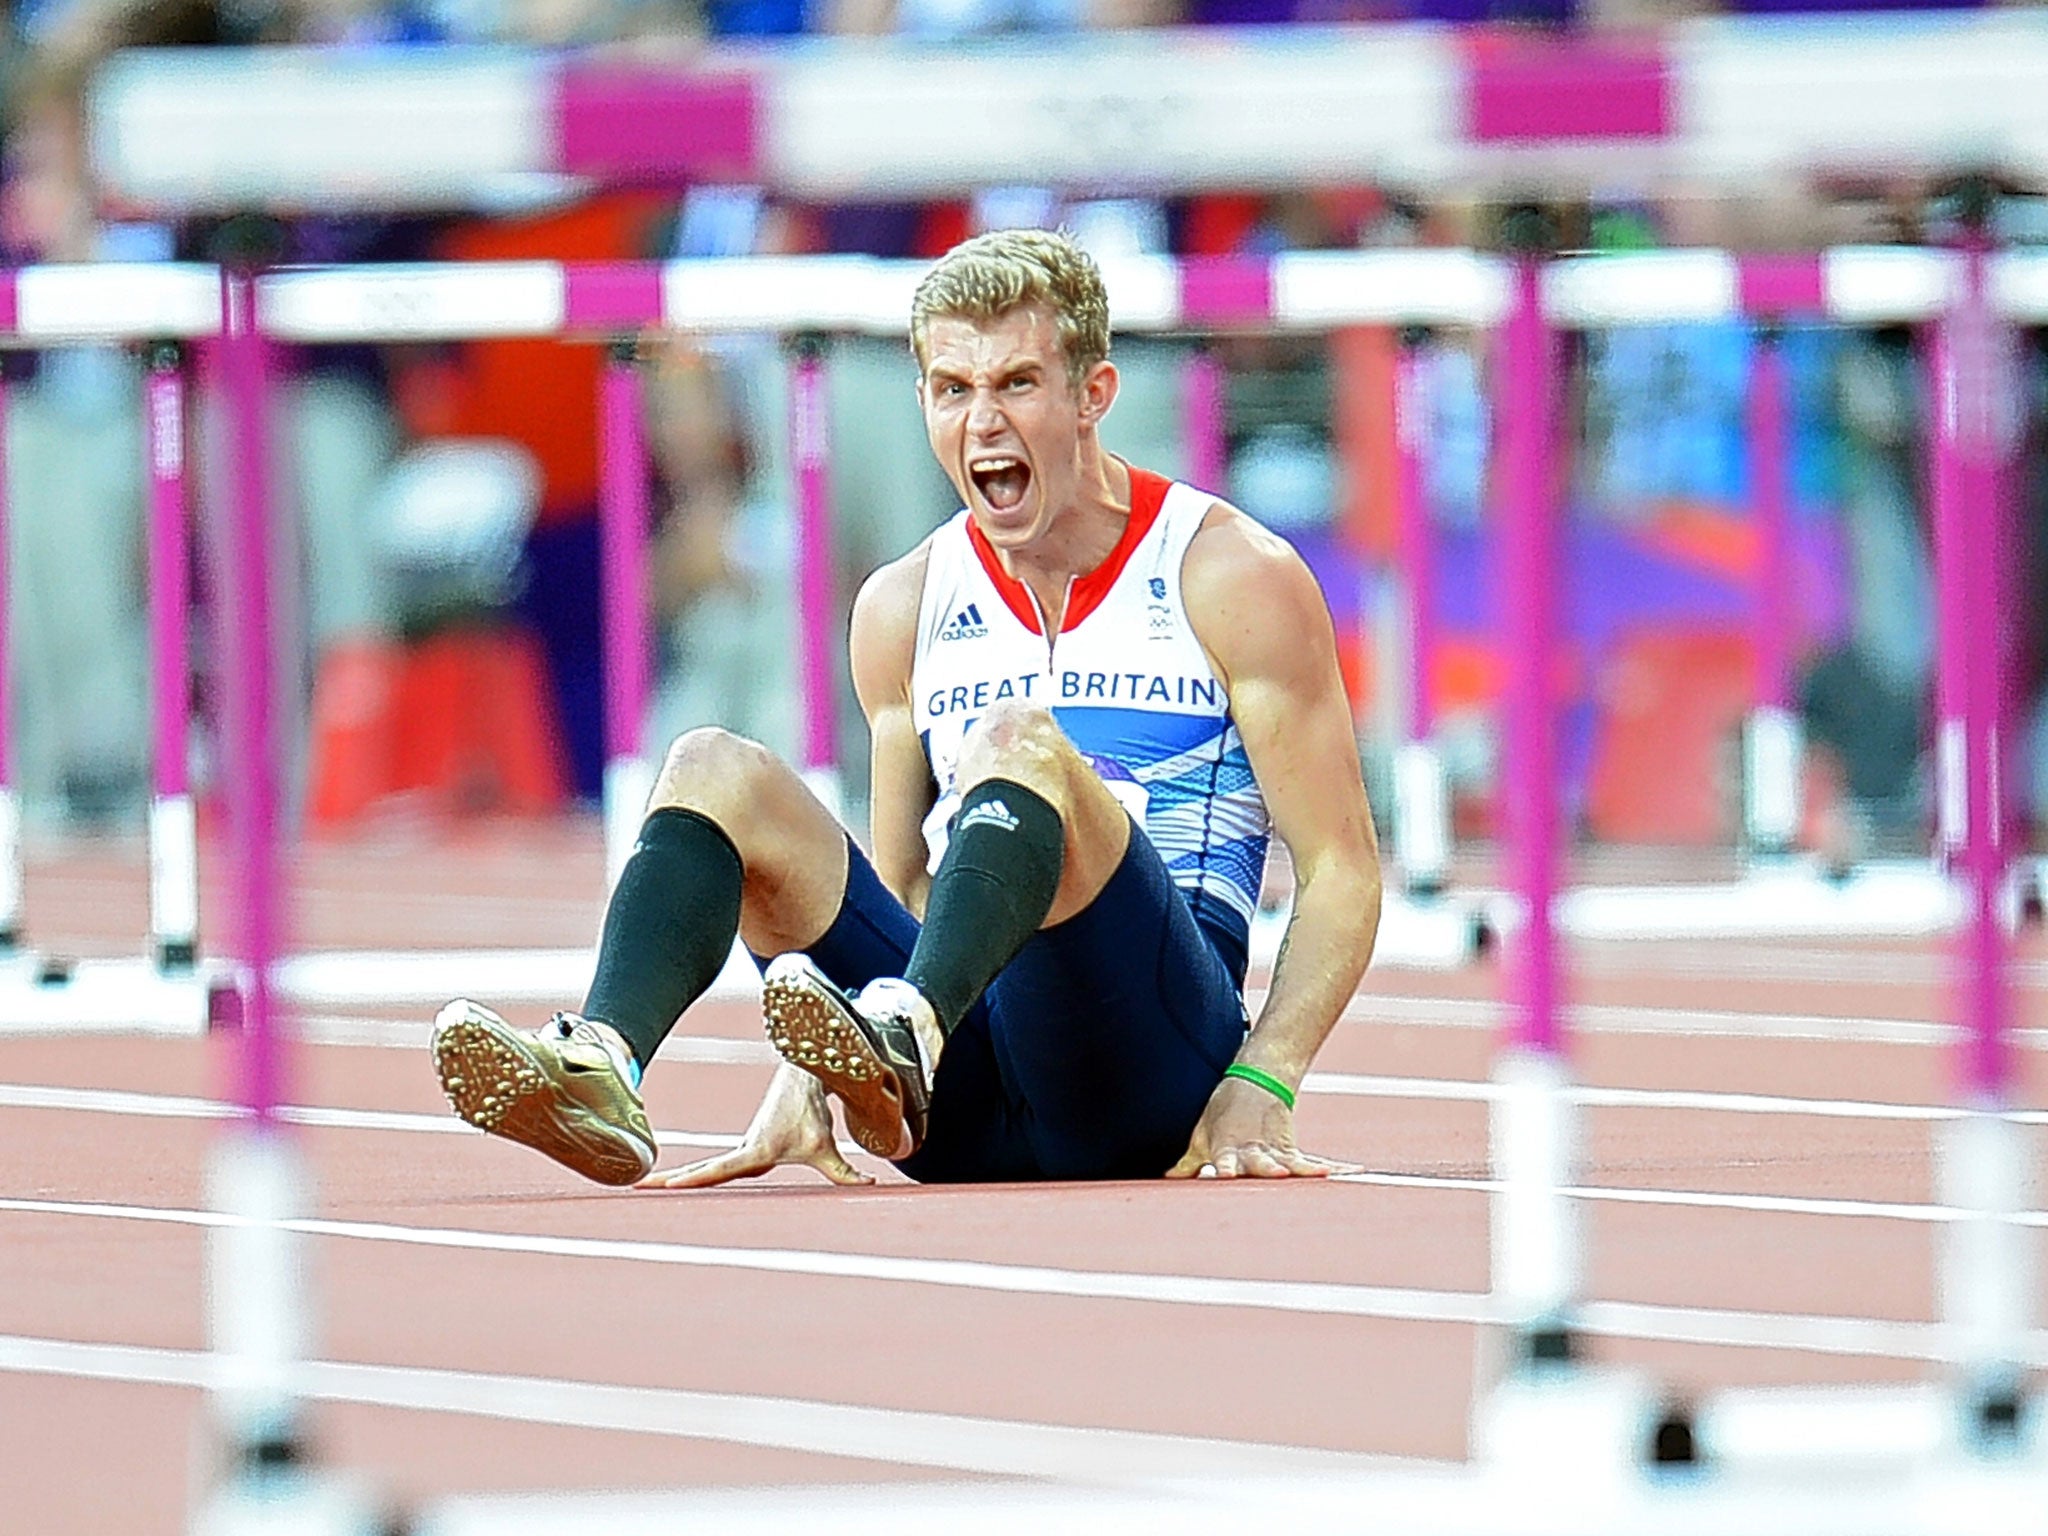 Jack Green shows his despair after falling in the semi-finals of the men’s 400m hurdles at the London Olympics